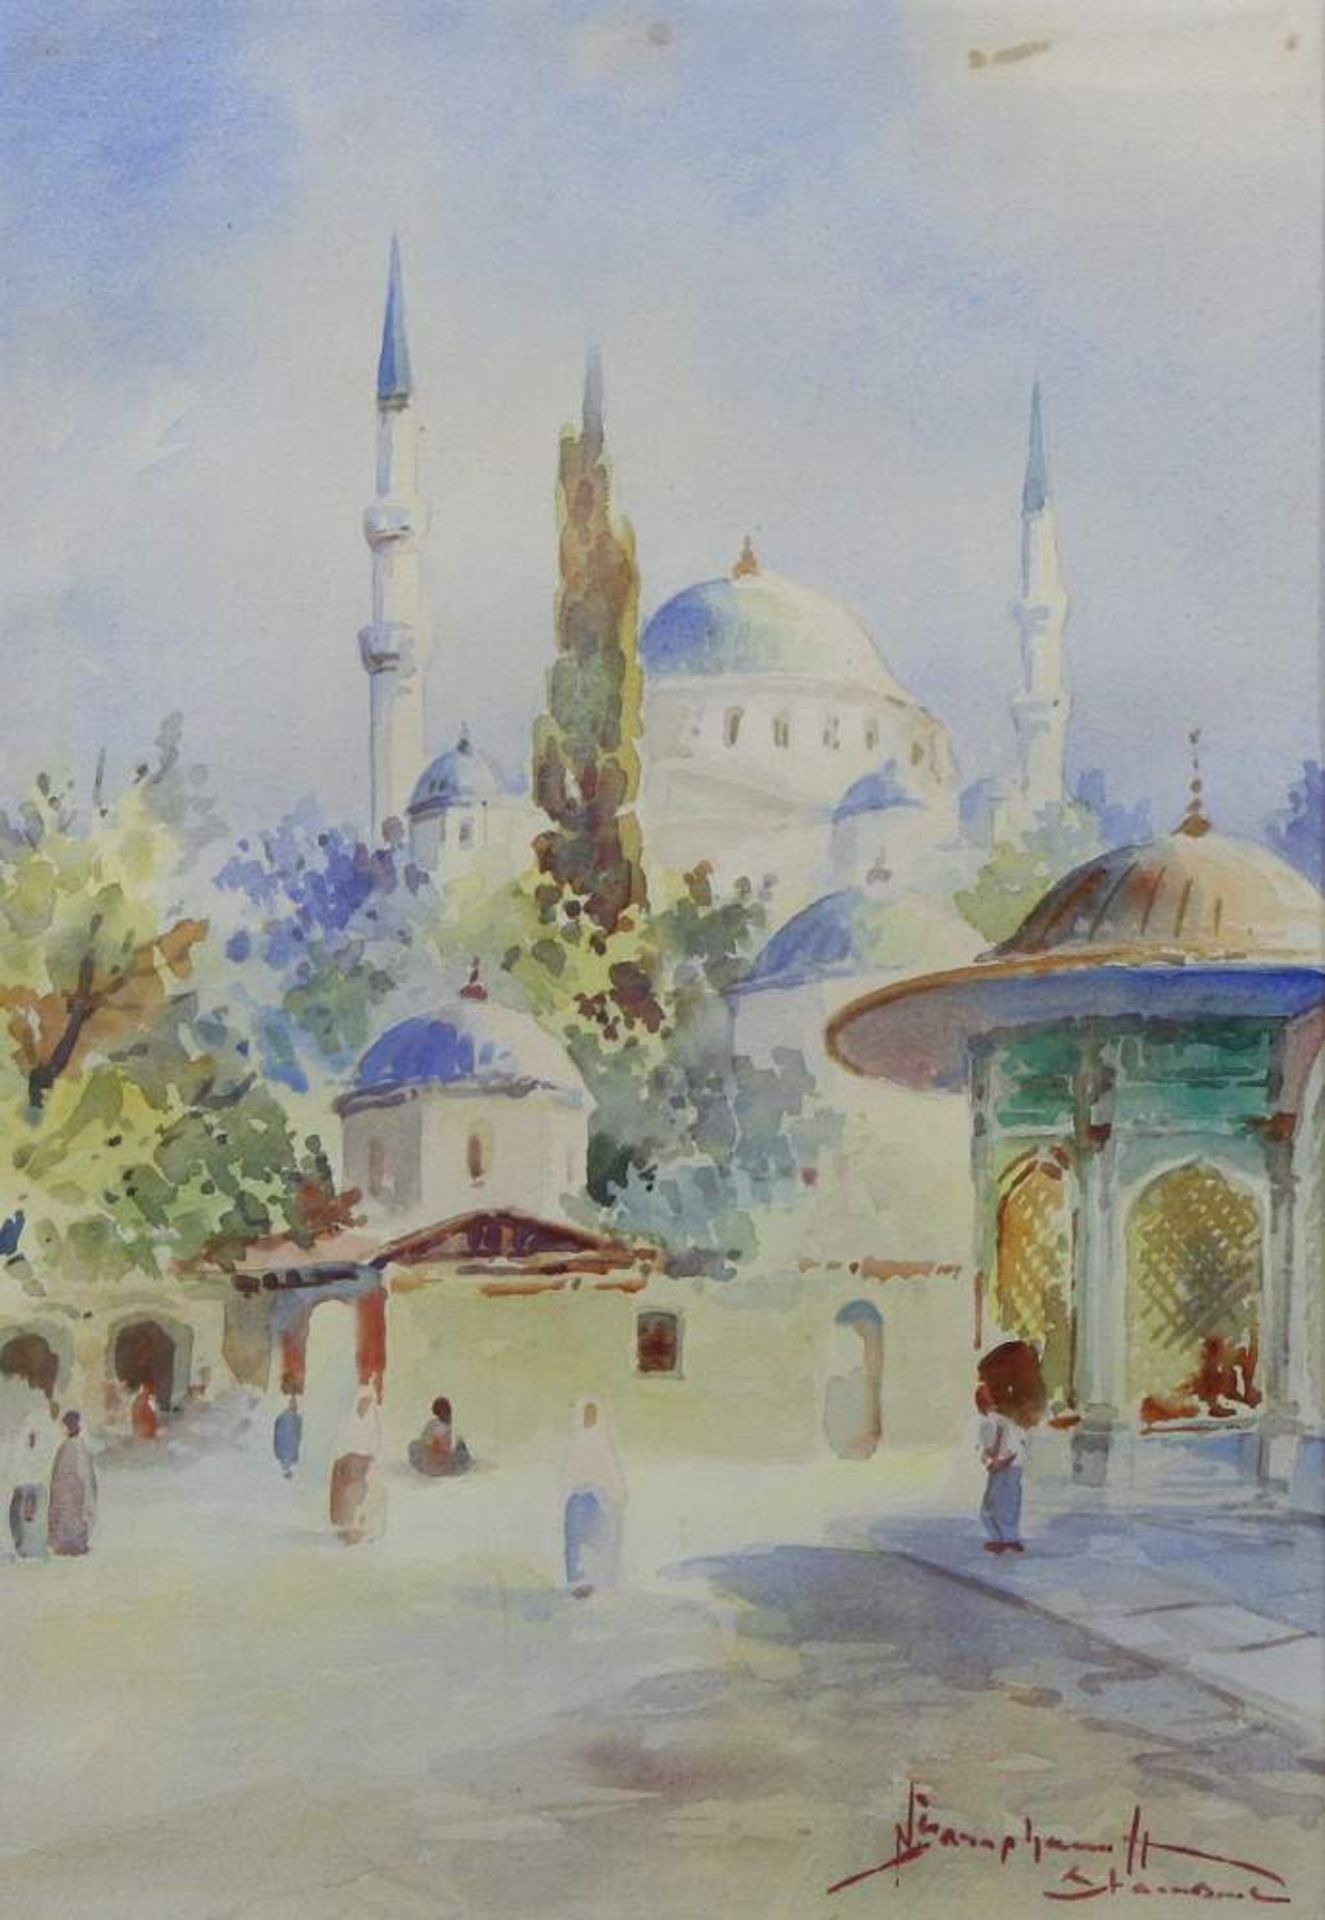 Turkish 20th century painter Watercolour, view of the Sultan-Ahmad Mosque (Blue Mosque) in Istanbul,